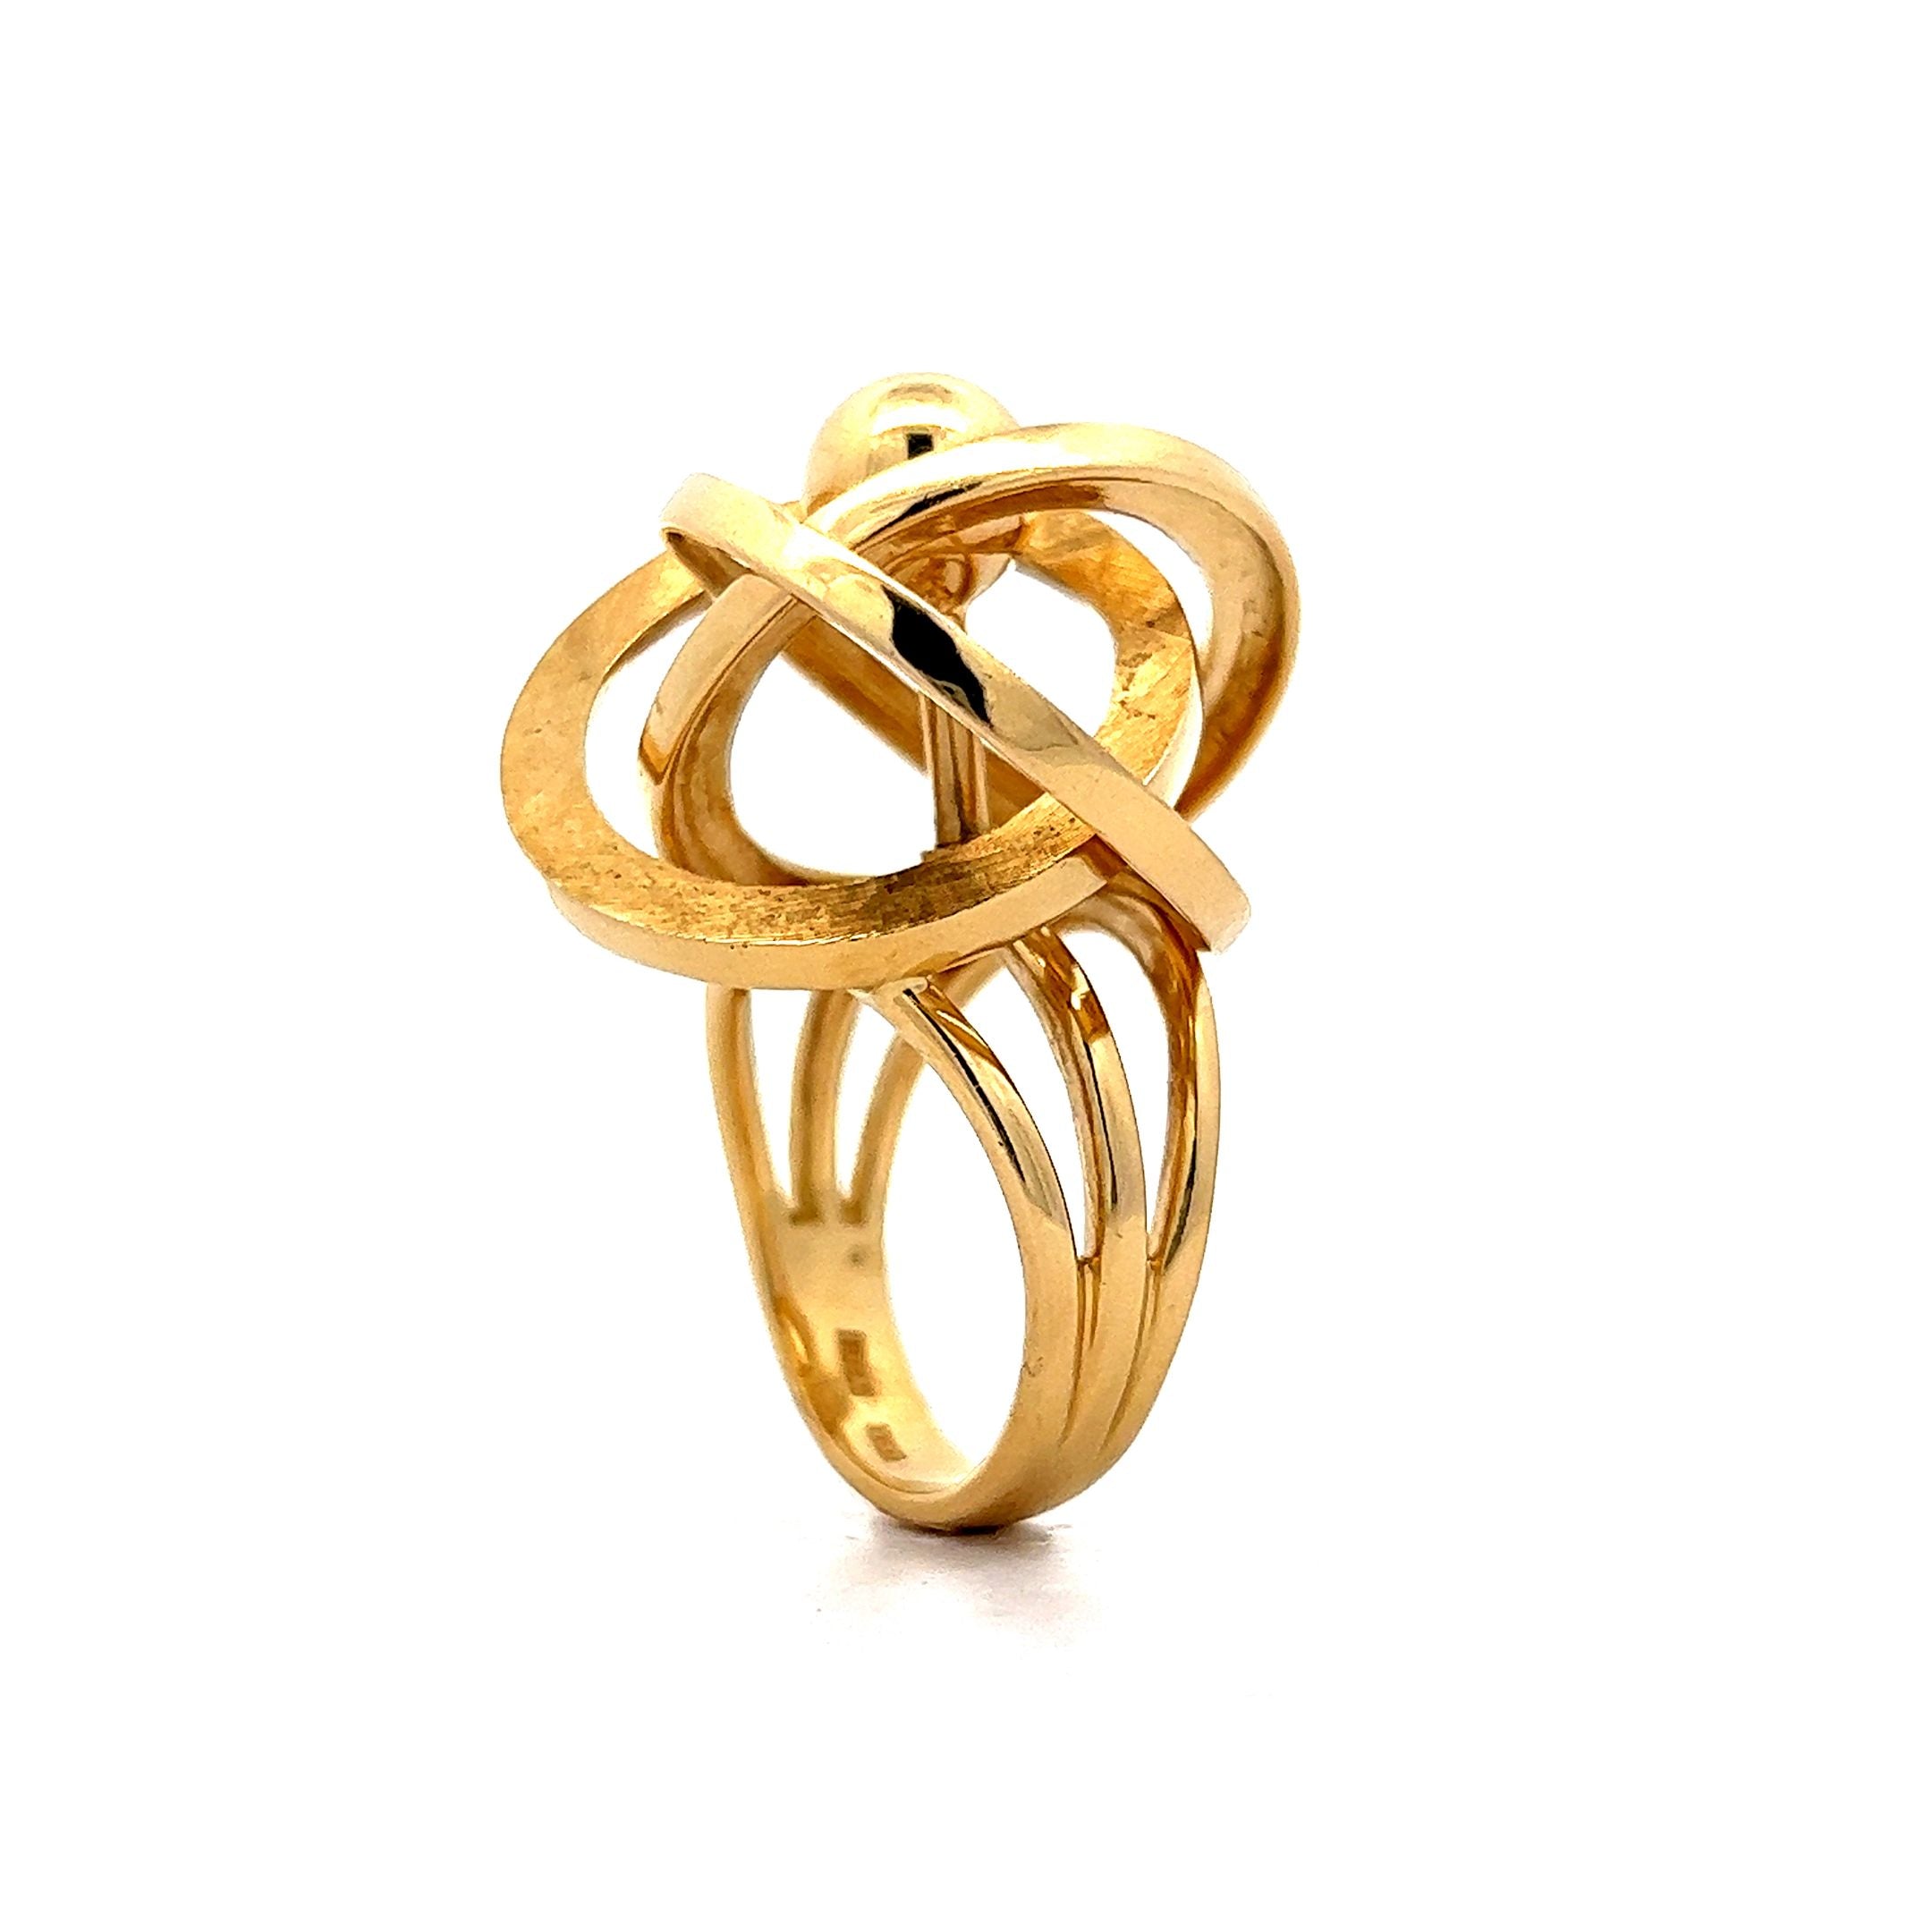 Gyroscopic Cocktail Ring in 18k Yellow Gold